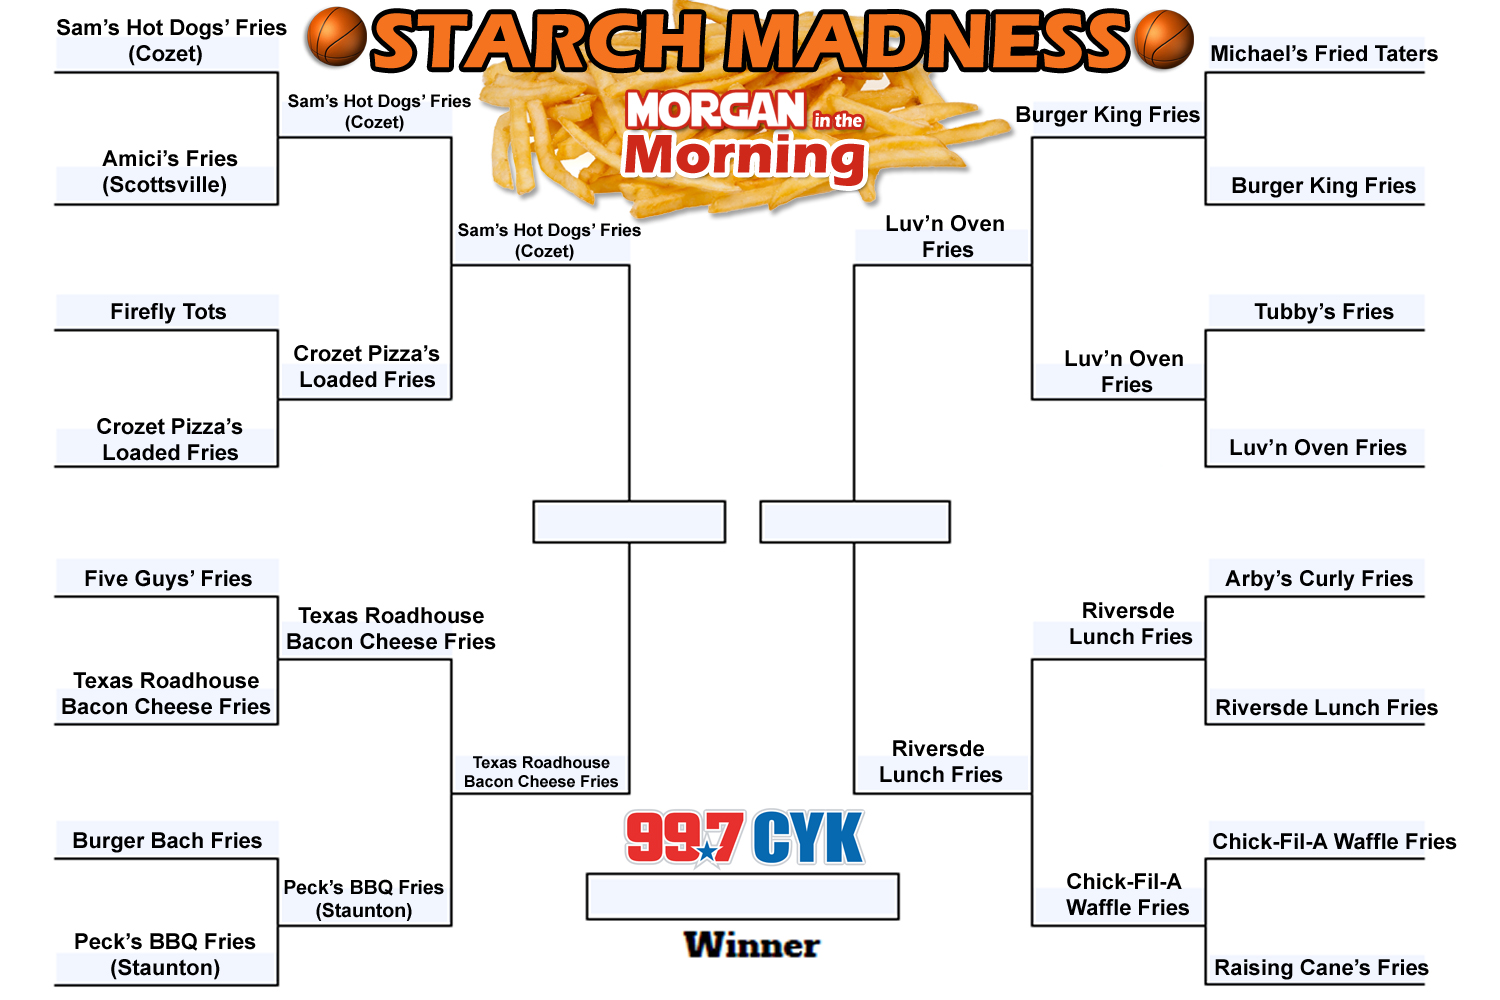 Vote for your favorite in Starch Madness!